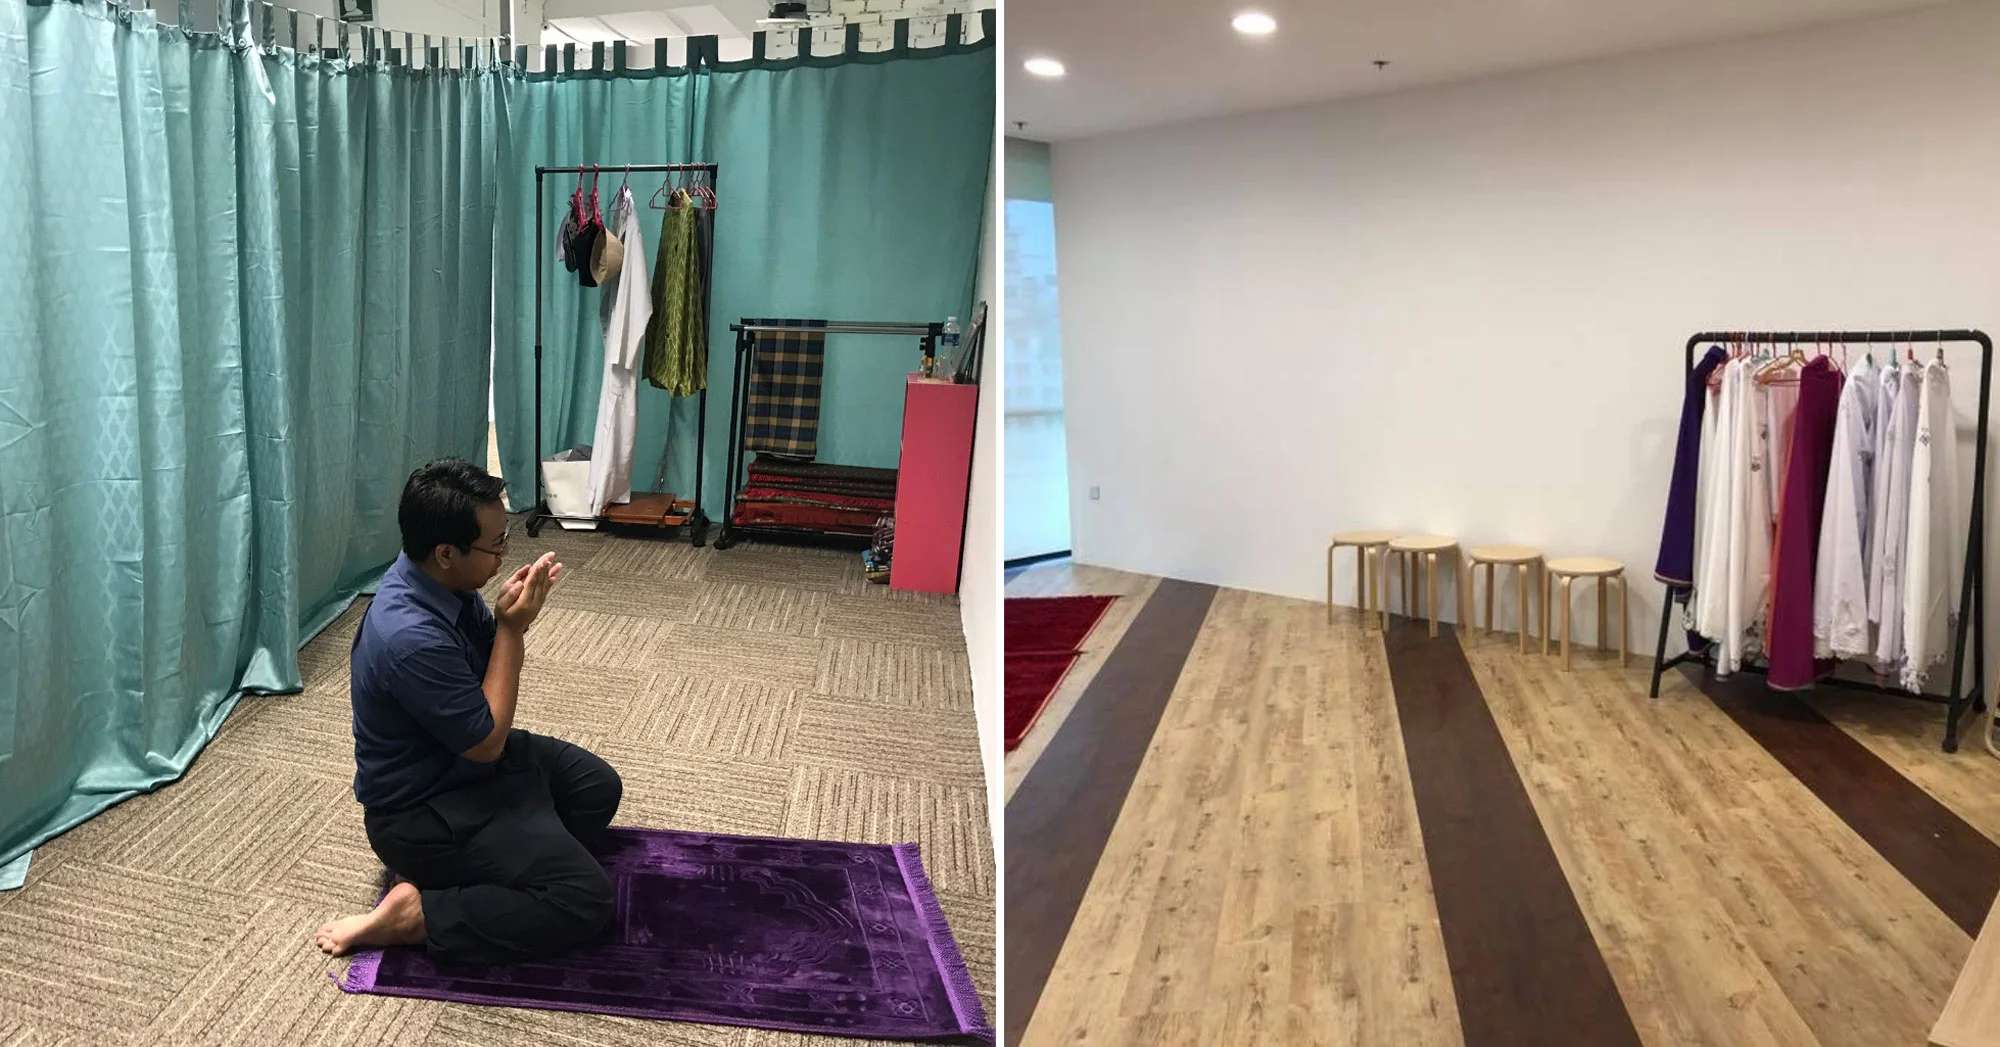 You Can Do Your Prayers At These 42 Spots In Singapore (Other Than Mosques!)